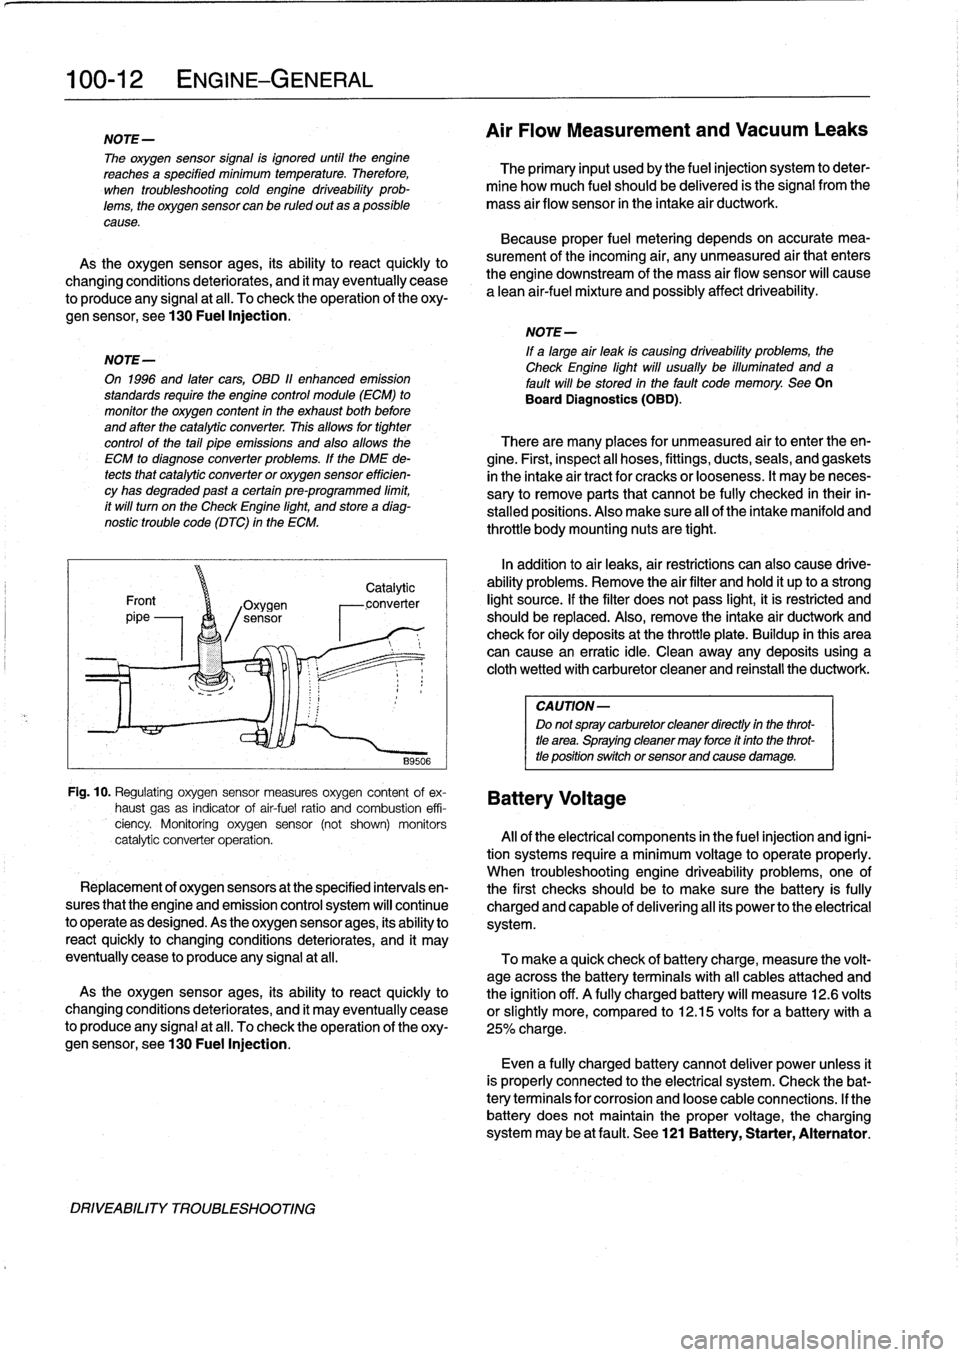 BMW 323i 1995 E36 Workshop Manual 
100-
1
2
ENGINE-GENERAL

NOTE-

The
oxygen
sensor
signal
is
ignored
until
the
engine
reachesa
specified
minimum
temperature
.
Therefore,

	

The
primary
input
usedby
the
fuel
injection
system
to
dete